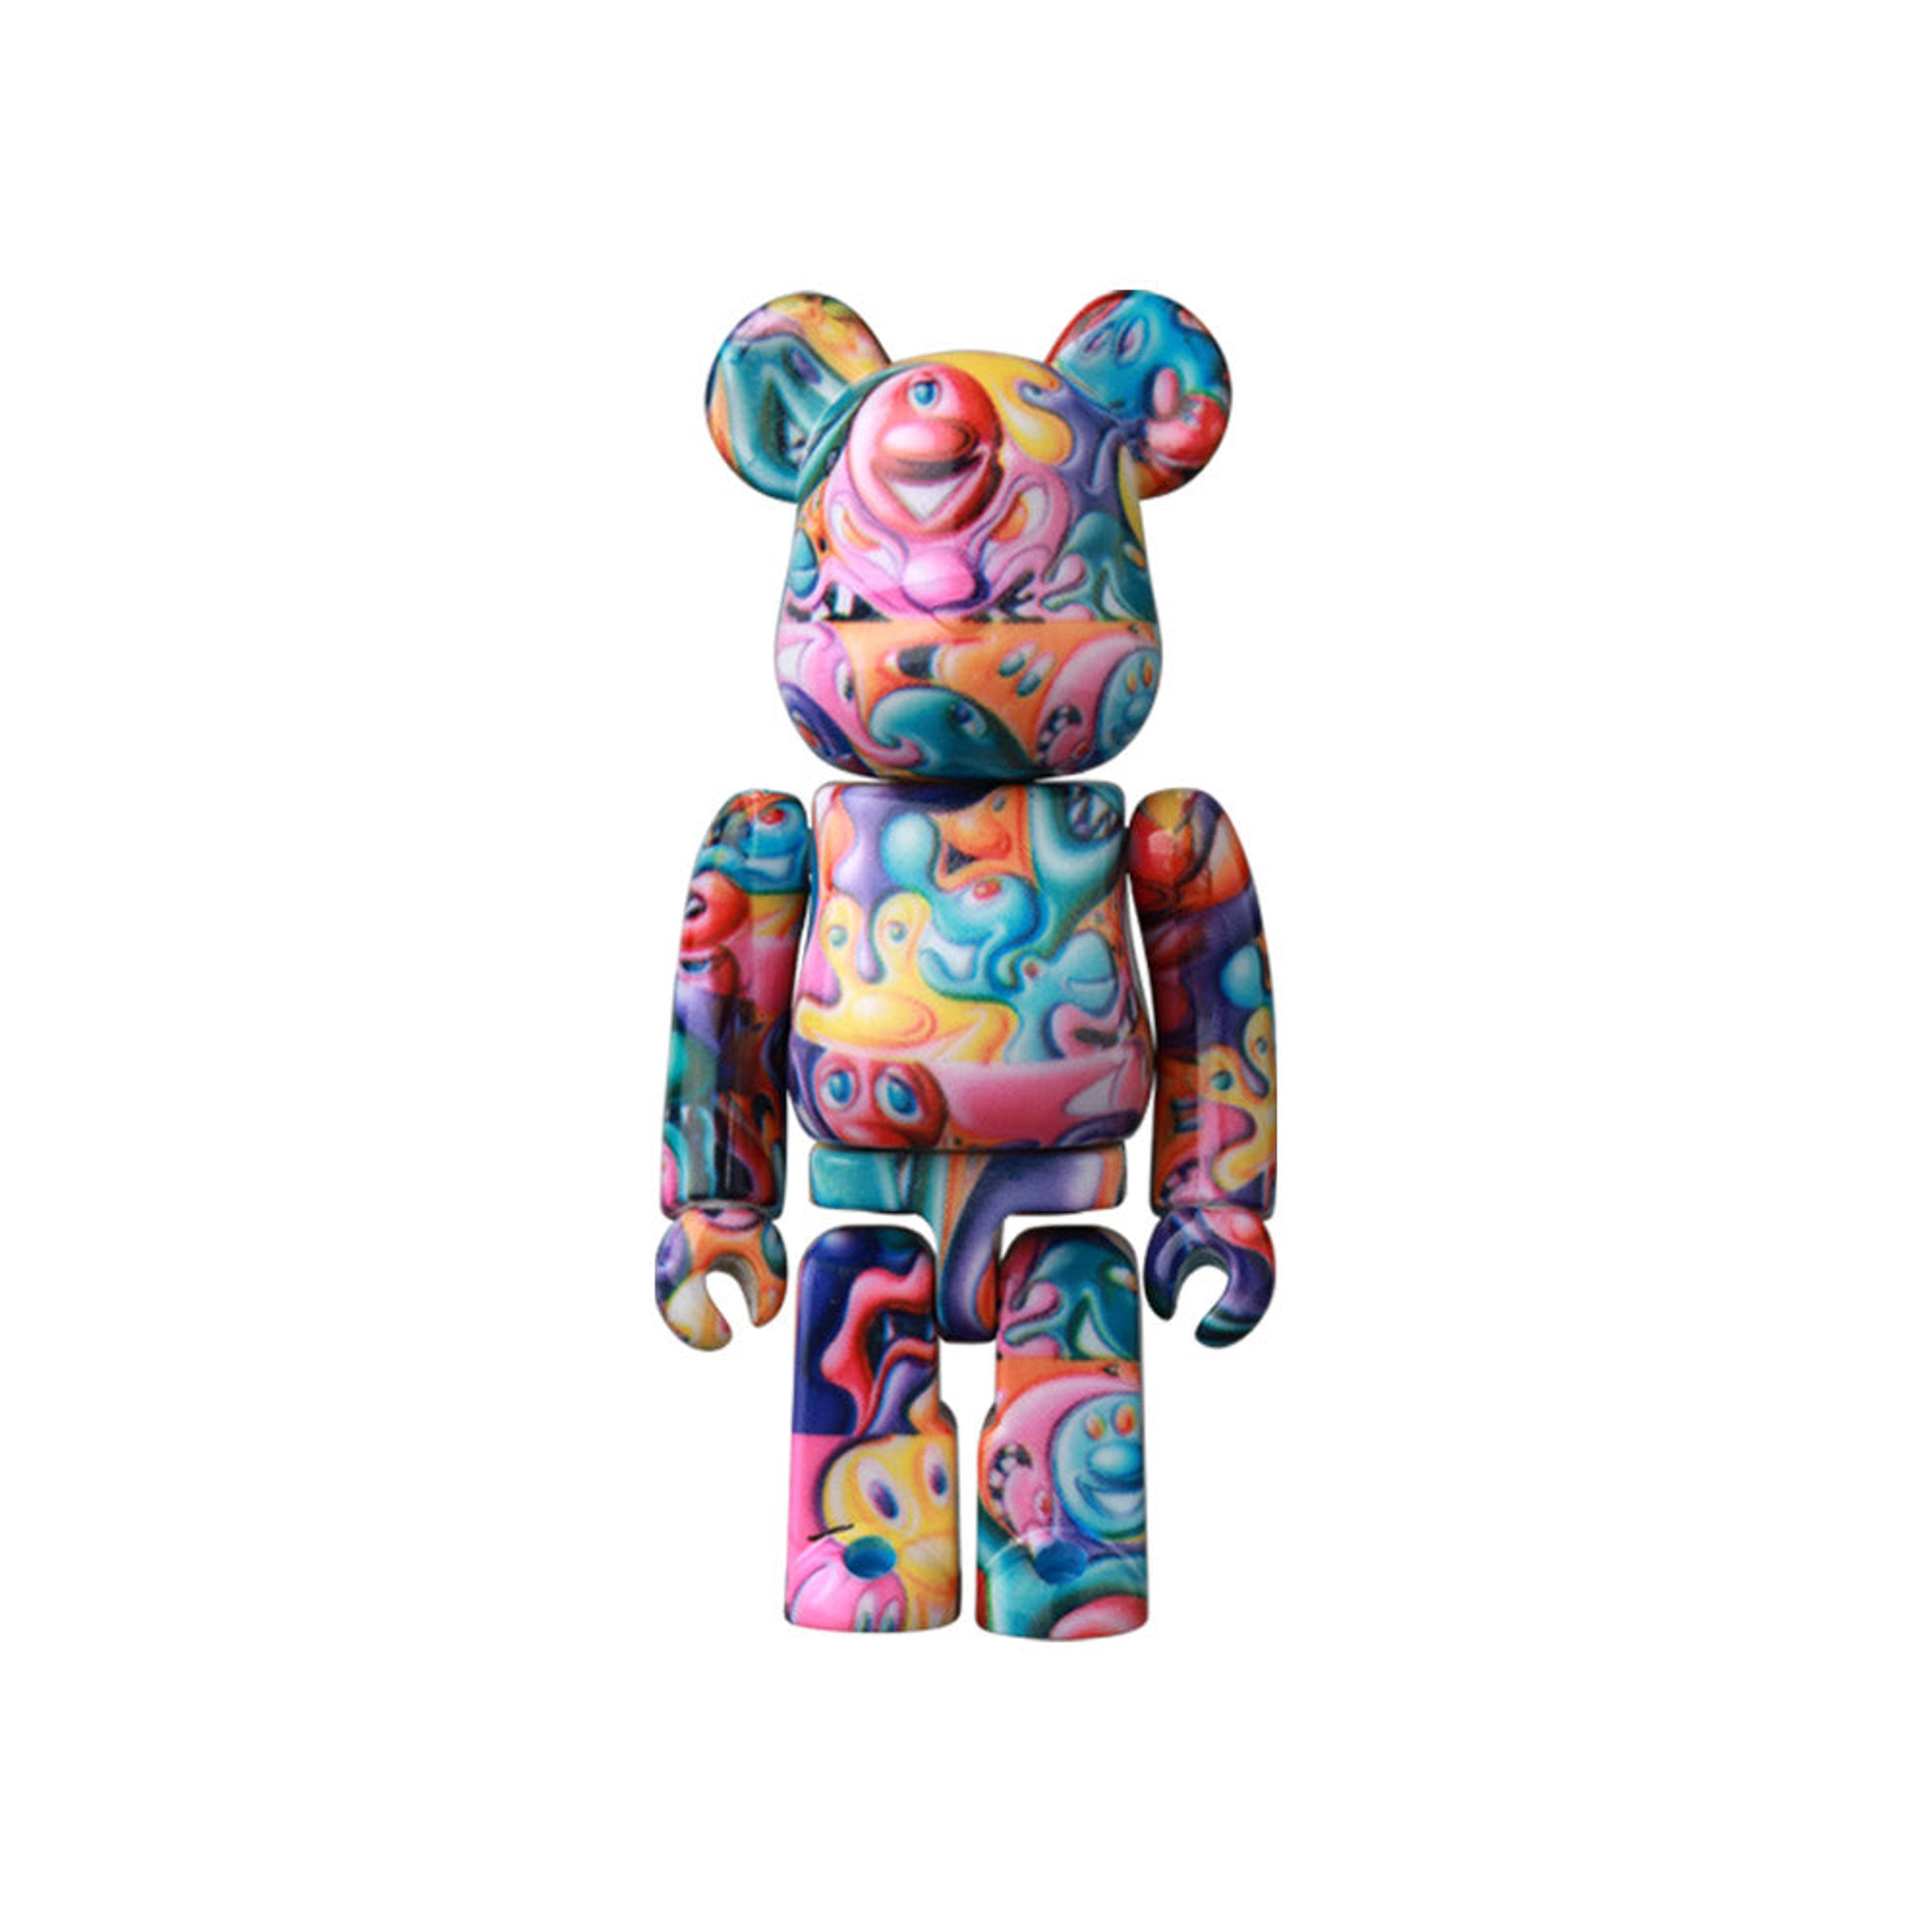 Alternate View 16 of Bearbrick Series 44 Display Case (24 Blind Boxes) by Medicom Toy